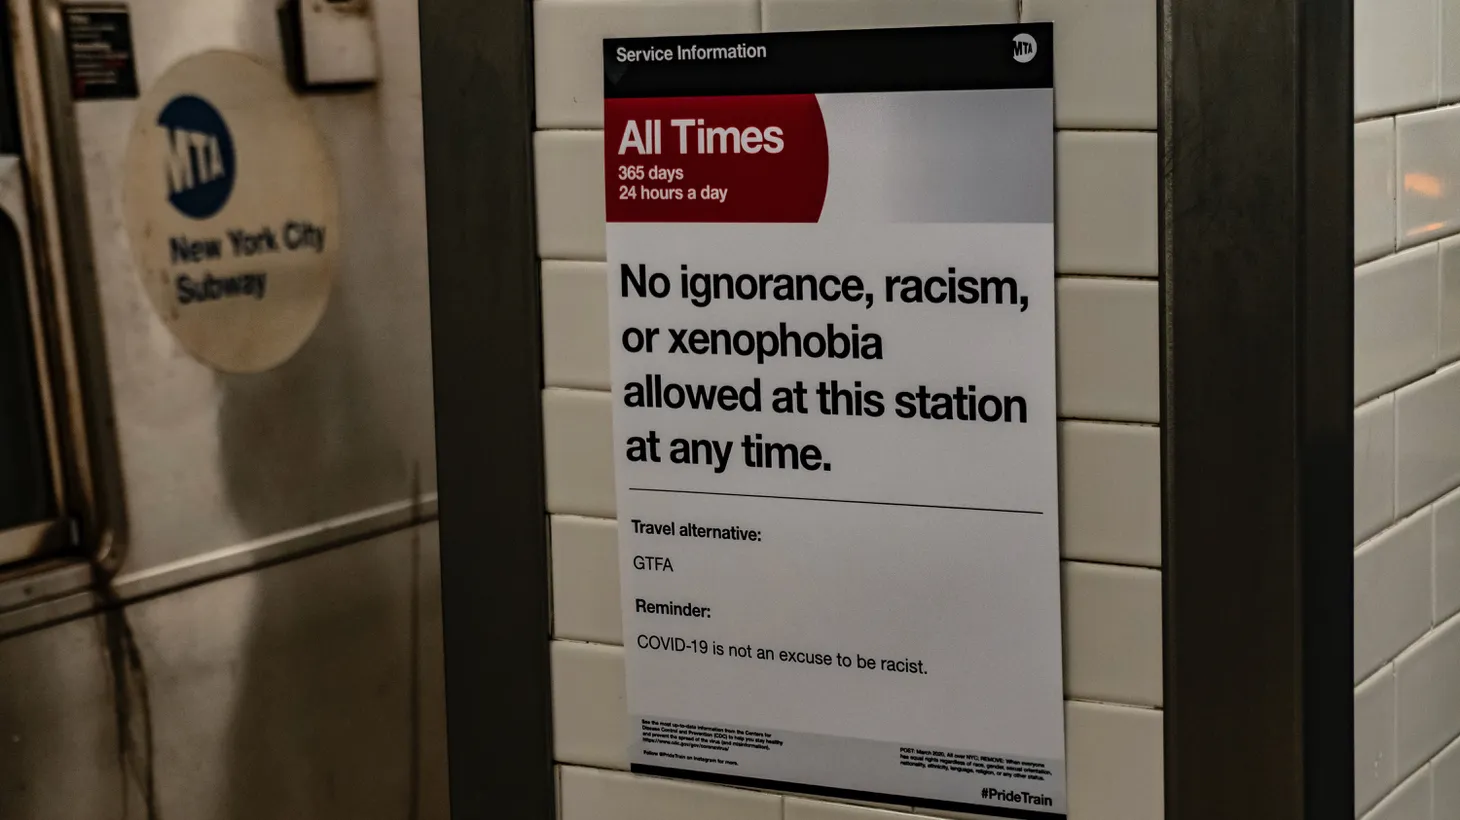 The movement and travel restrictions instituted in NYC are having significant economic impacts. A sign reads "No ignorance, racism, or xenophobia" allowed.